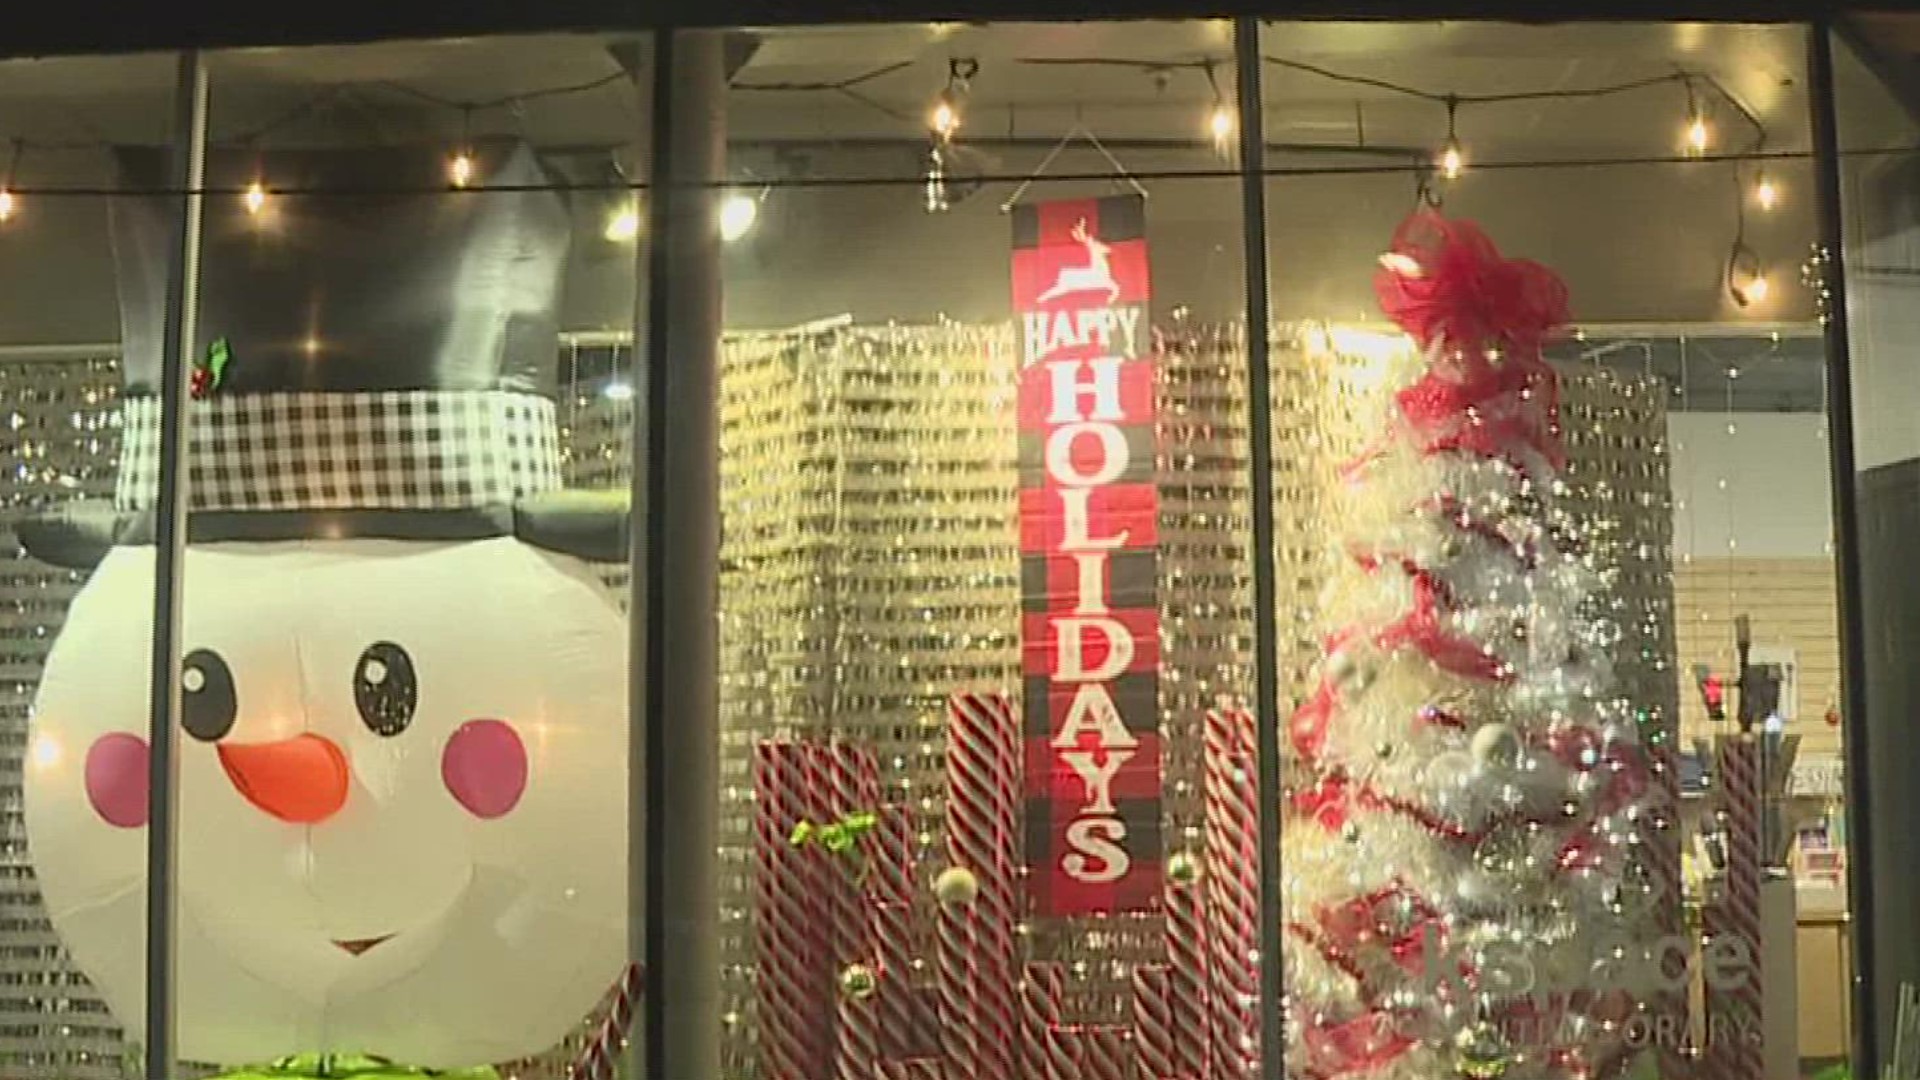 Over 30 businesses participated in this years Merriest Downtown décor contest.